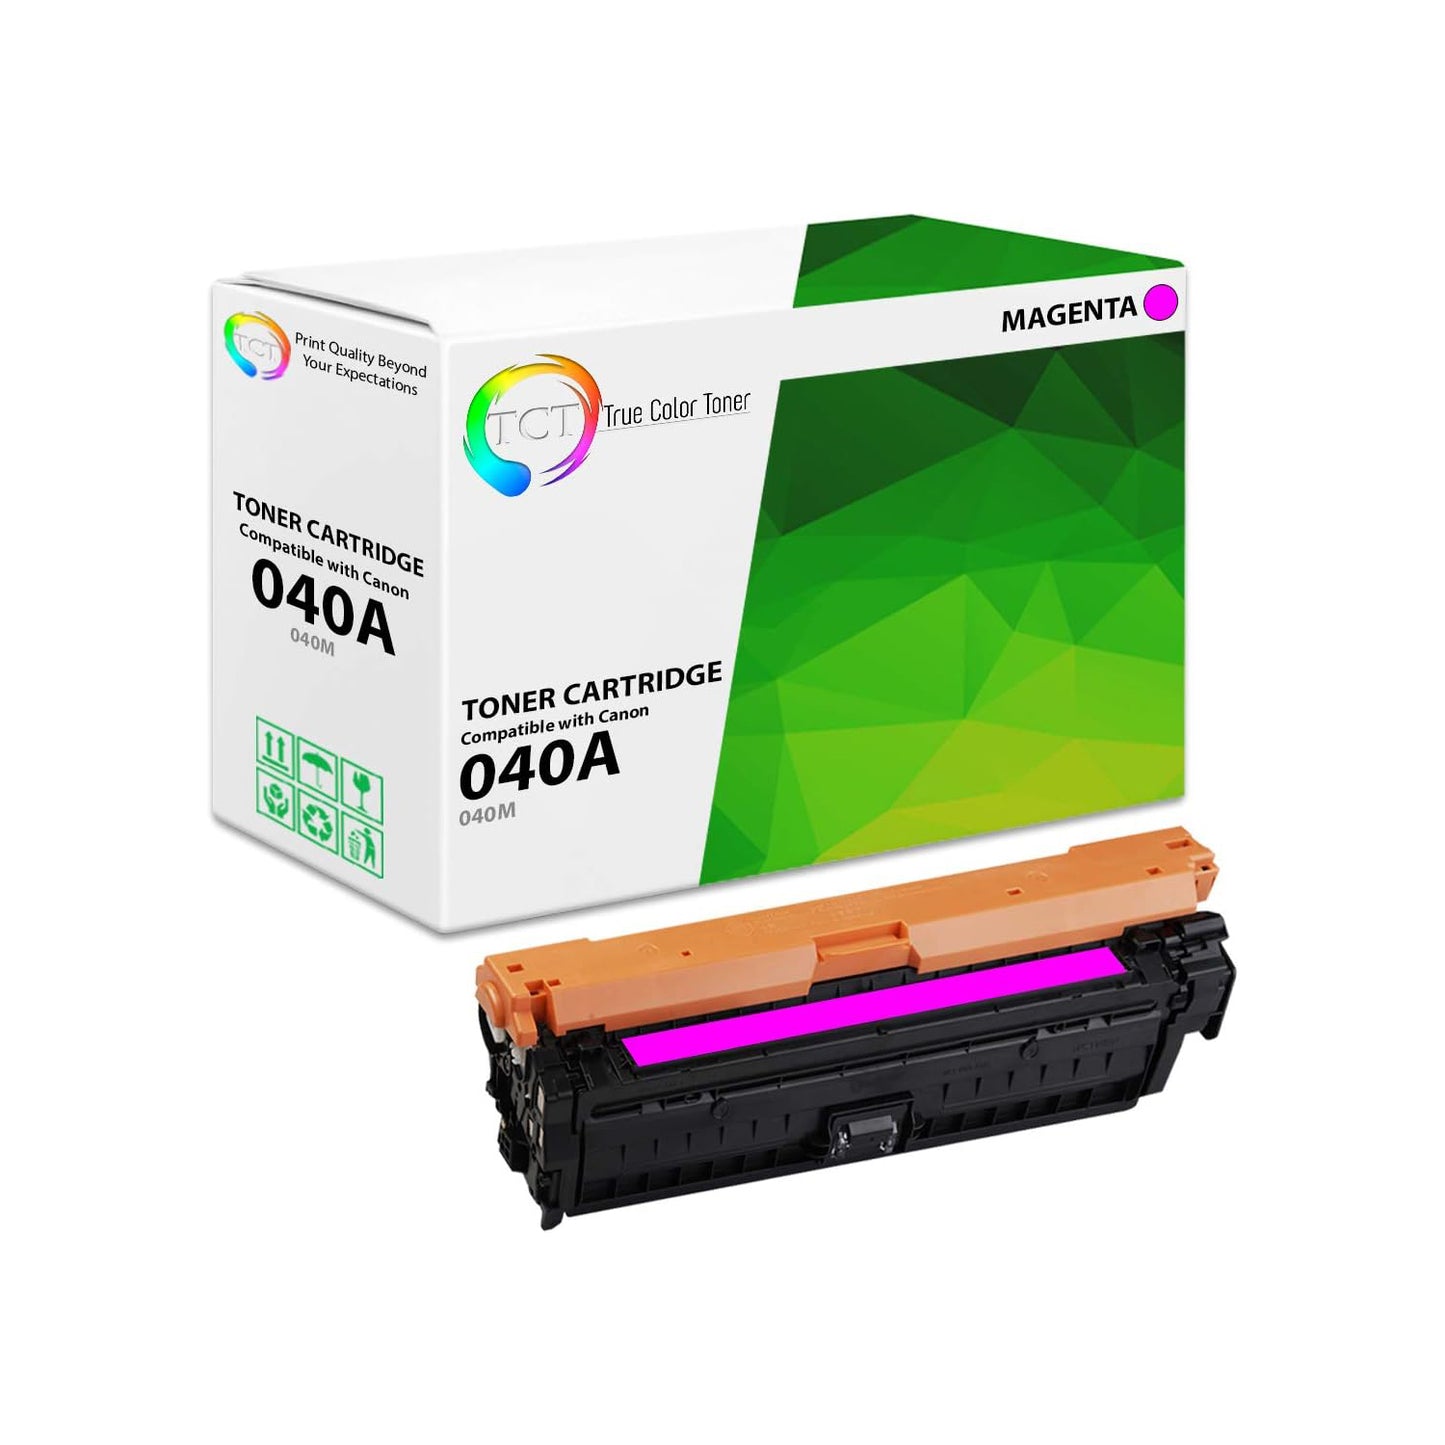 TCT Compatible Toner Cartridge Replacement for the Canon 040 Series - 1 Pack Magenta